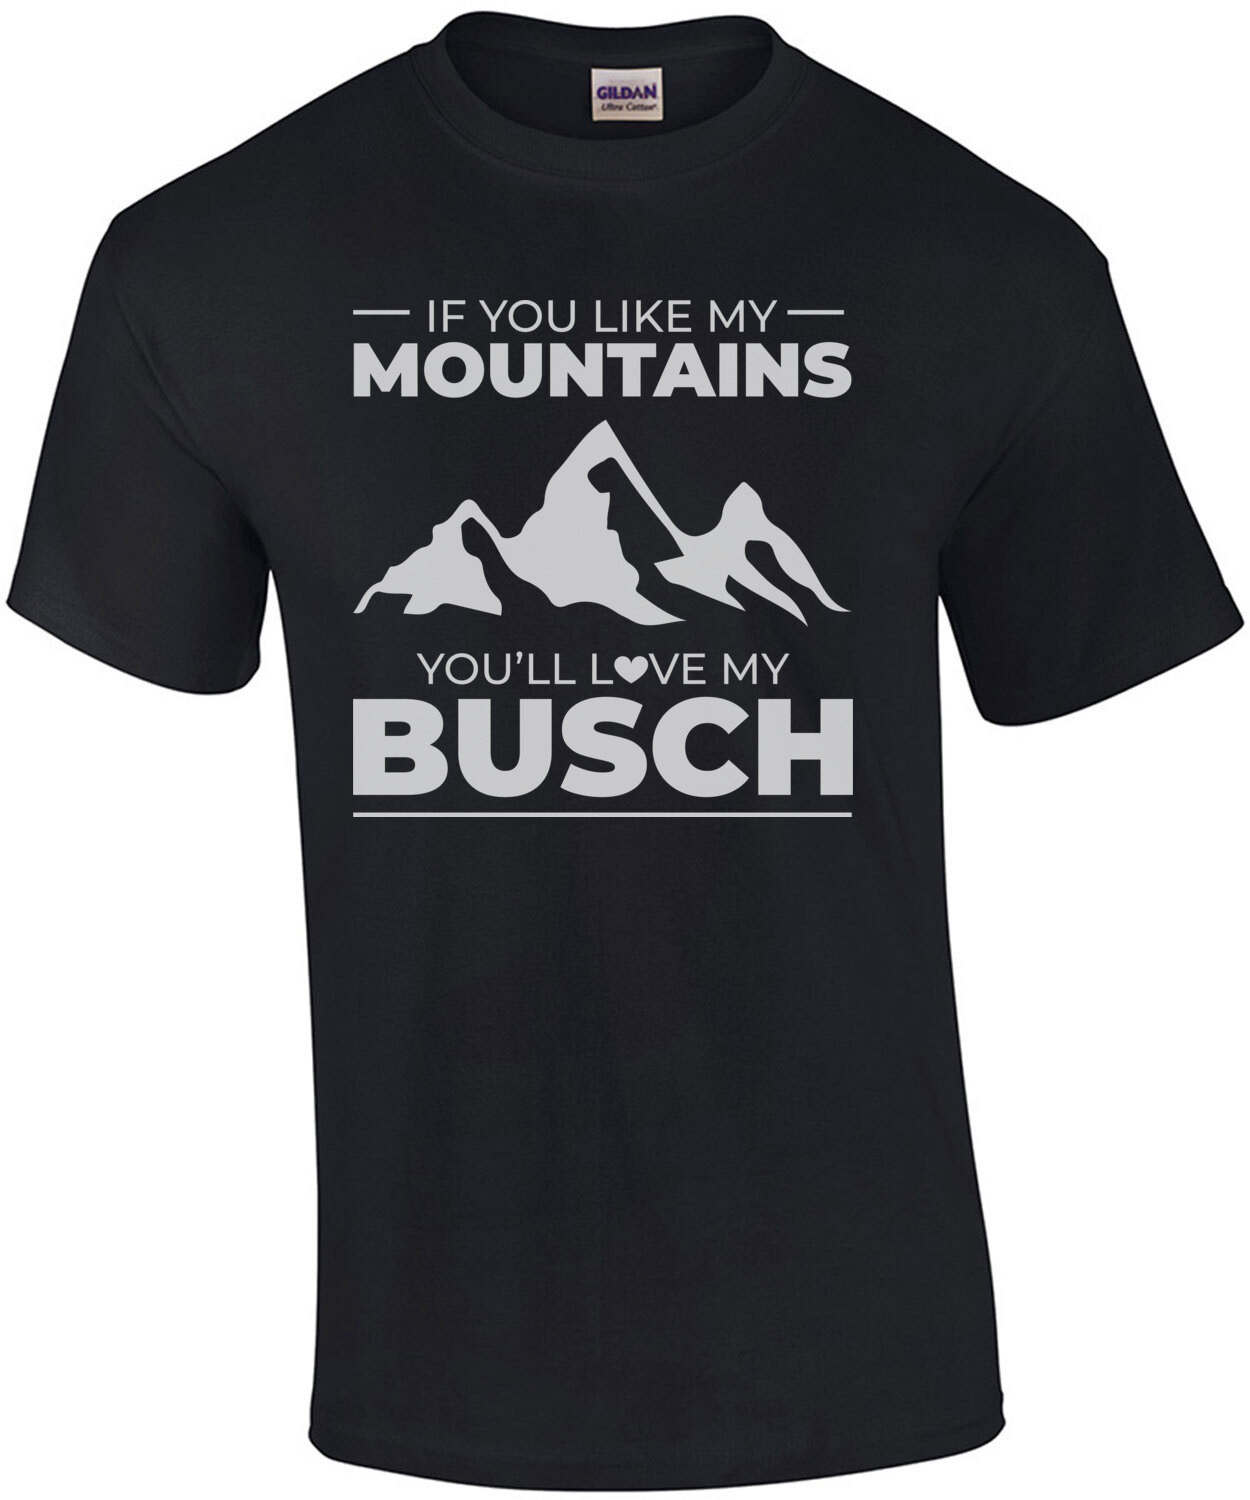 If you like my mountains you're love my Busch - funny beer drinking t-shirt